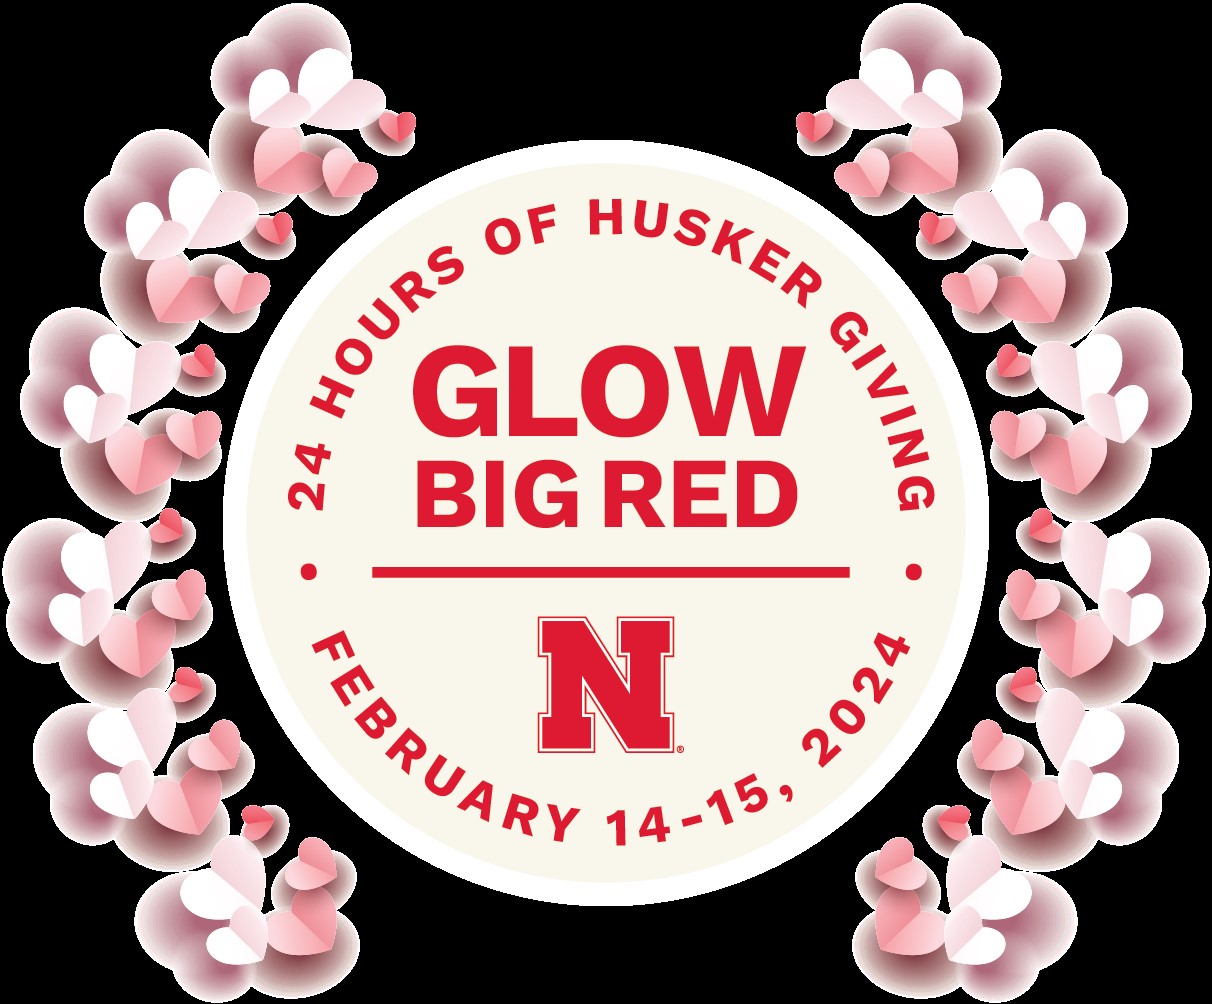 Show your Aggie love and support students during Glow Big Red February 14 - 15.